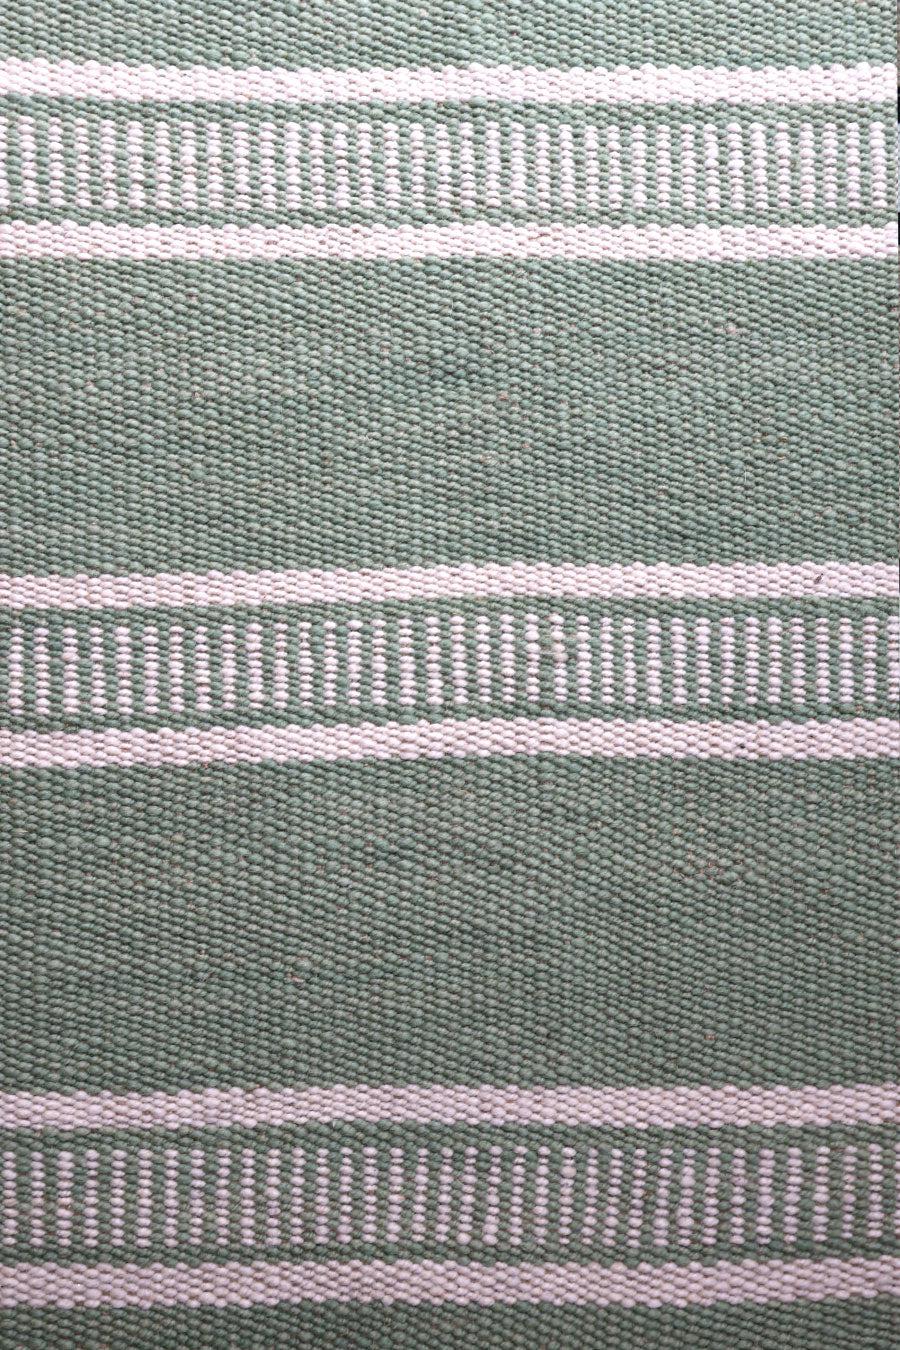 PLENA RUG | RUNNER #11 GREEN & NATURAL-The Andes Project